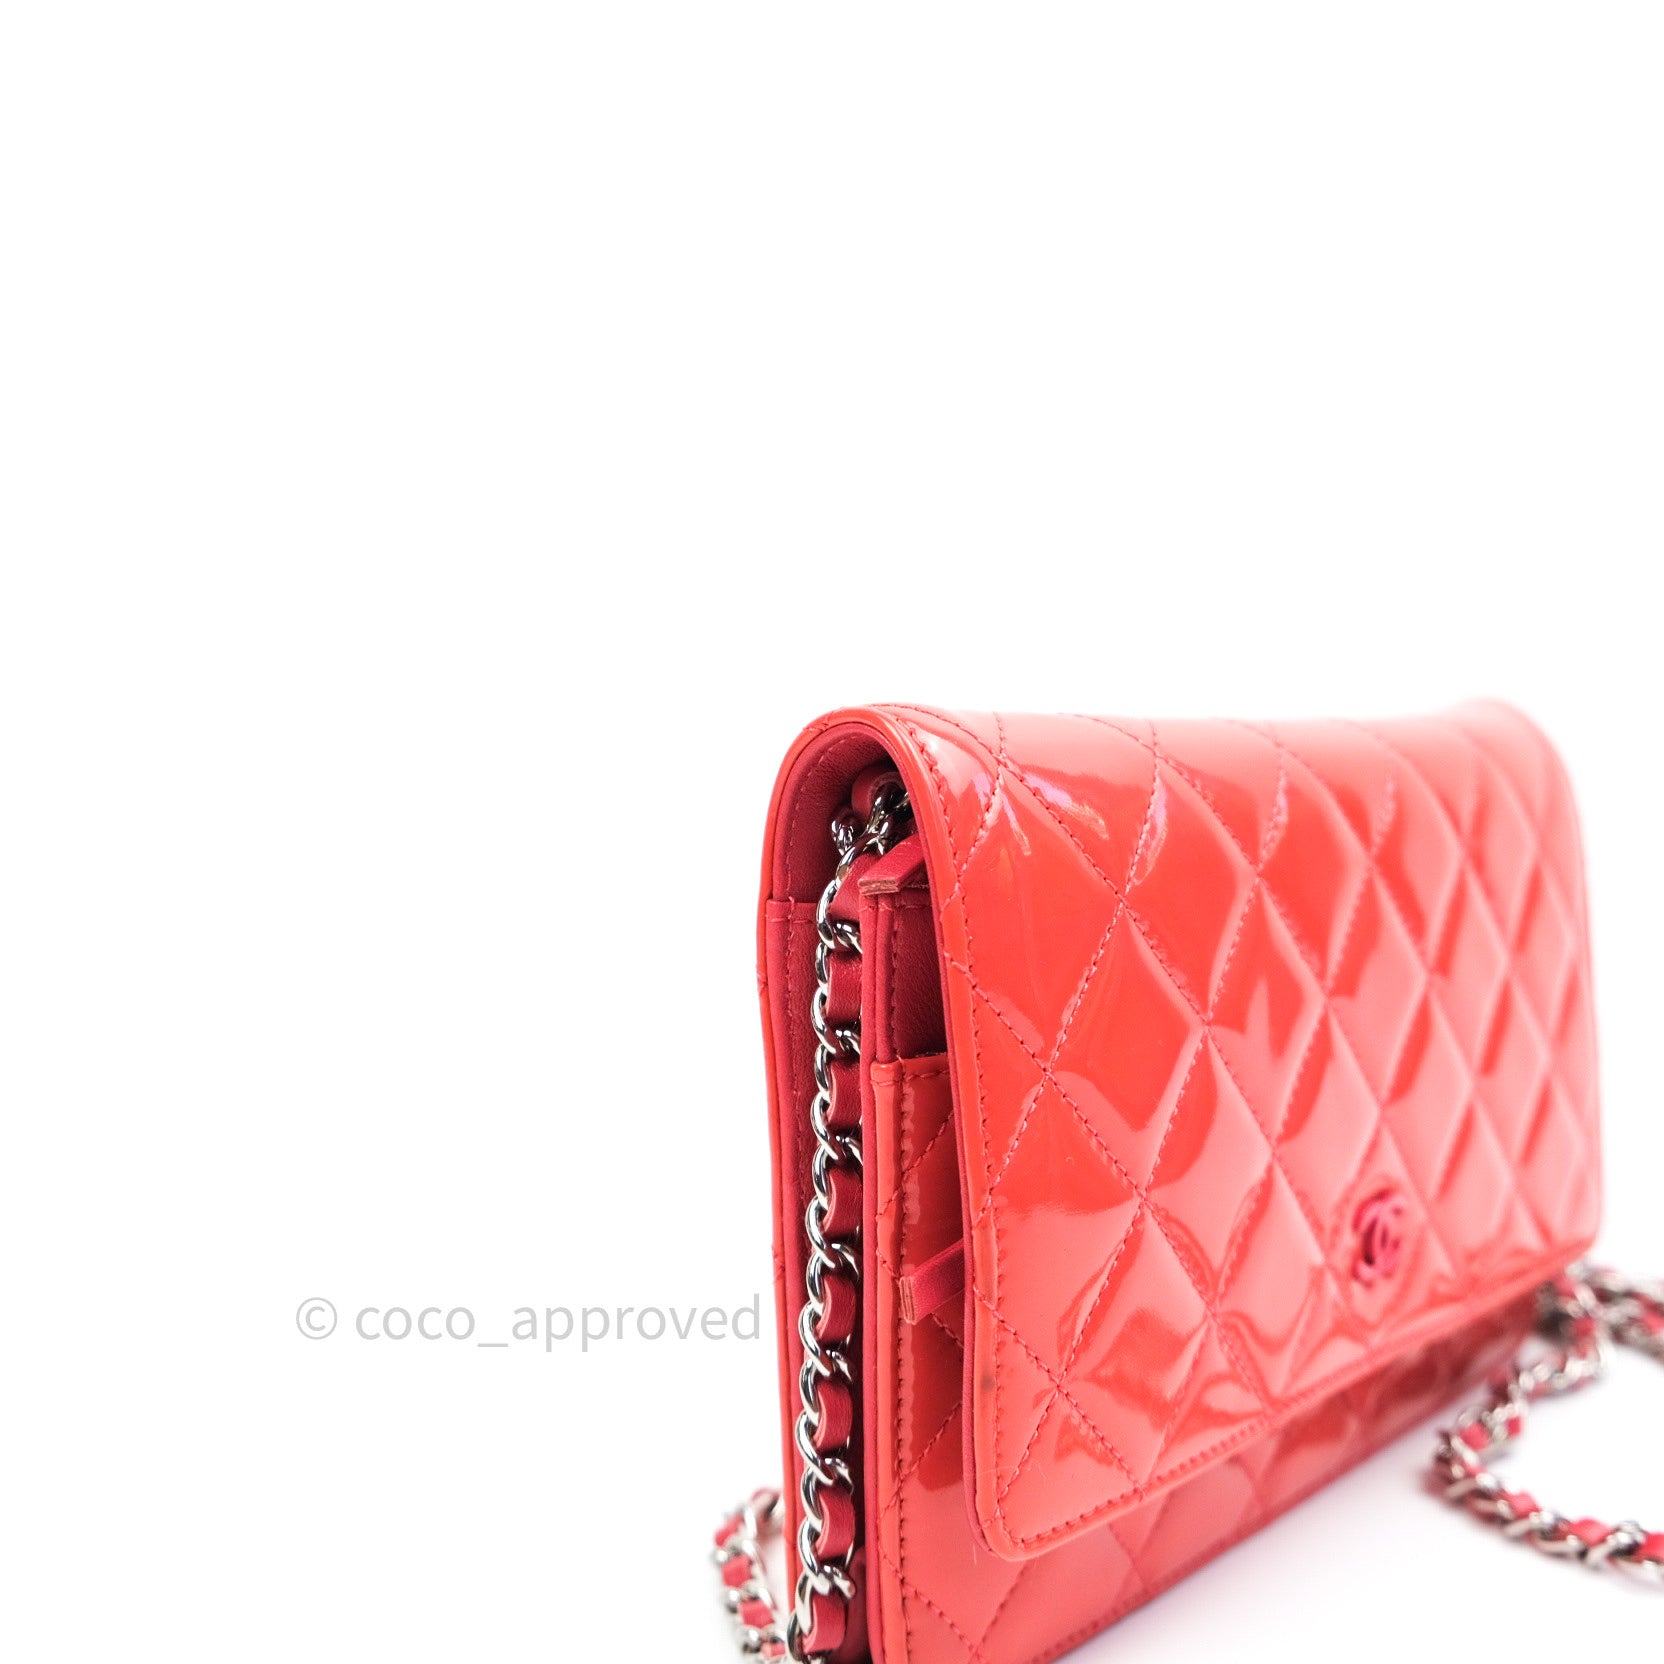 Chanel WOC Pink Patent Leather